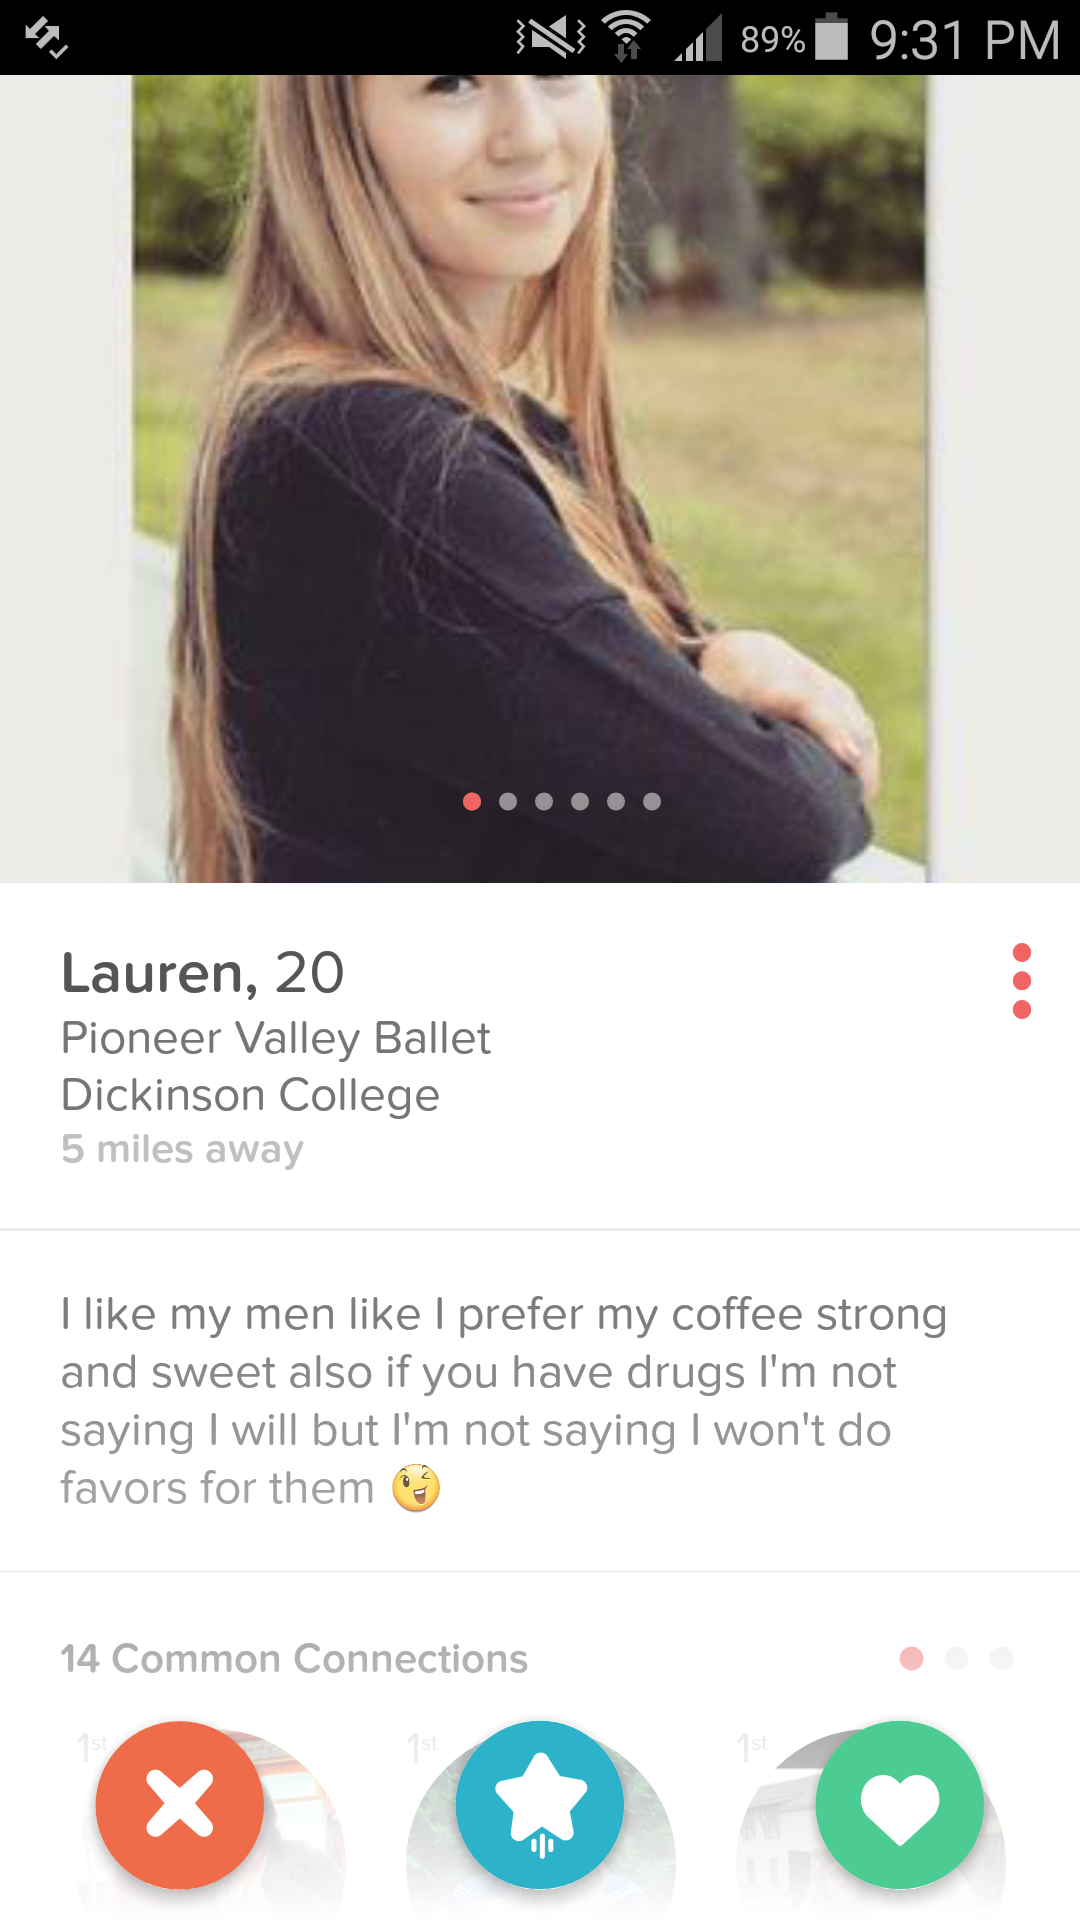 splishy splashy giggle giggle - Ns 89% Lauren, 20 Pioneer Valley Ballet Dickinson College 5 miles away I my men I prefer my coffee strong and sweet also if you have drugs I'm not saying I will but I'm not saying I won't do favors for them 14 Common Connec